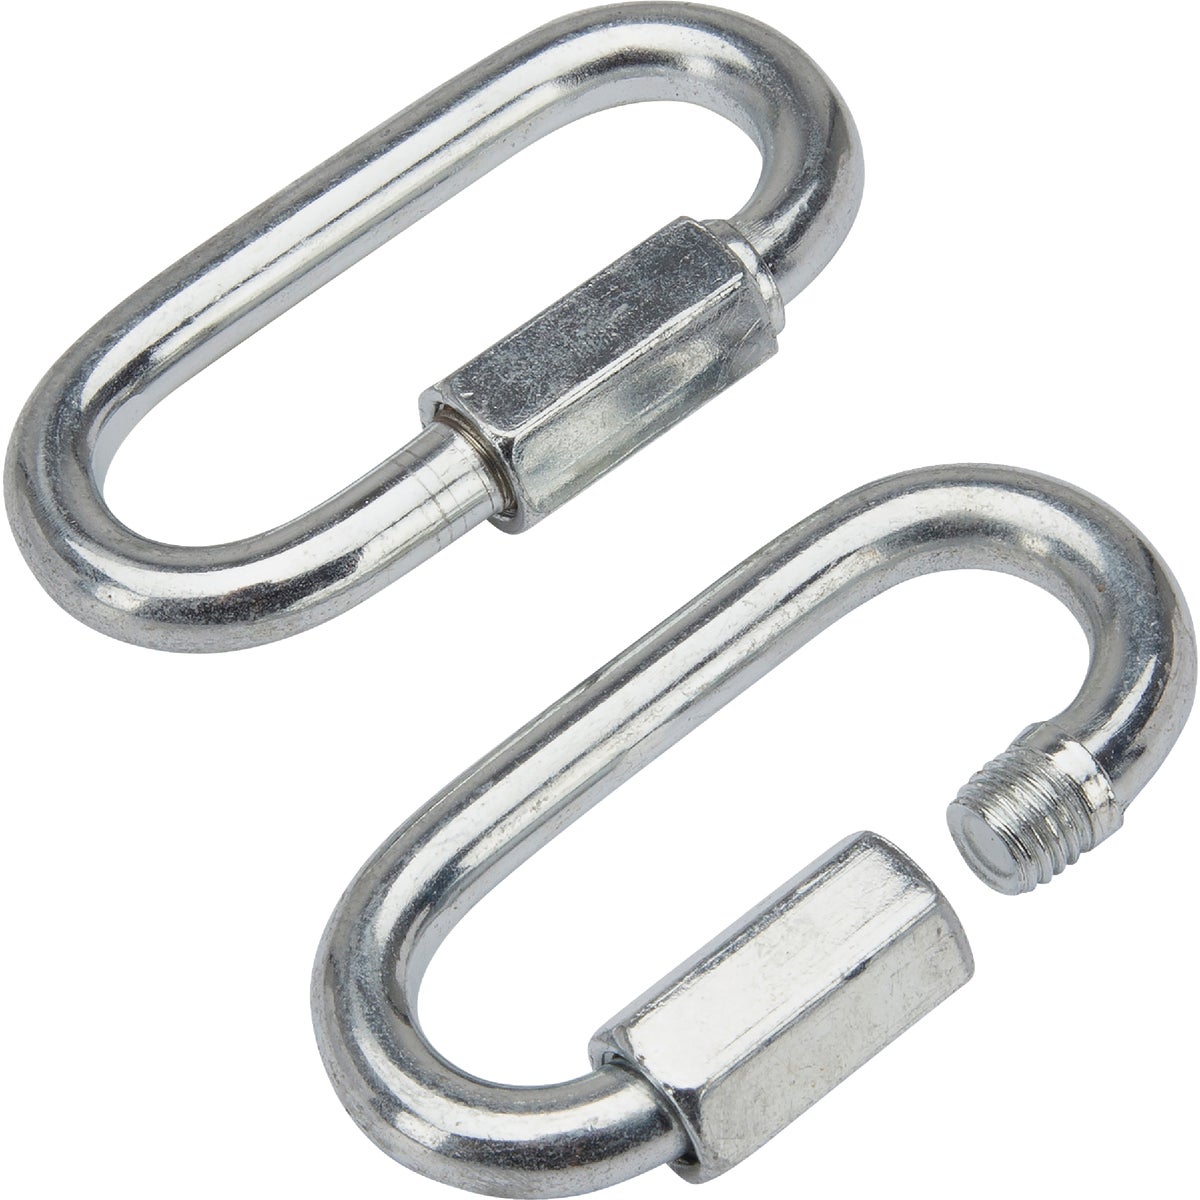 Reese Towpower Class III 5/16 In. Zinc-Plated Steel Quick Link (2-Pack)